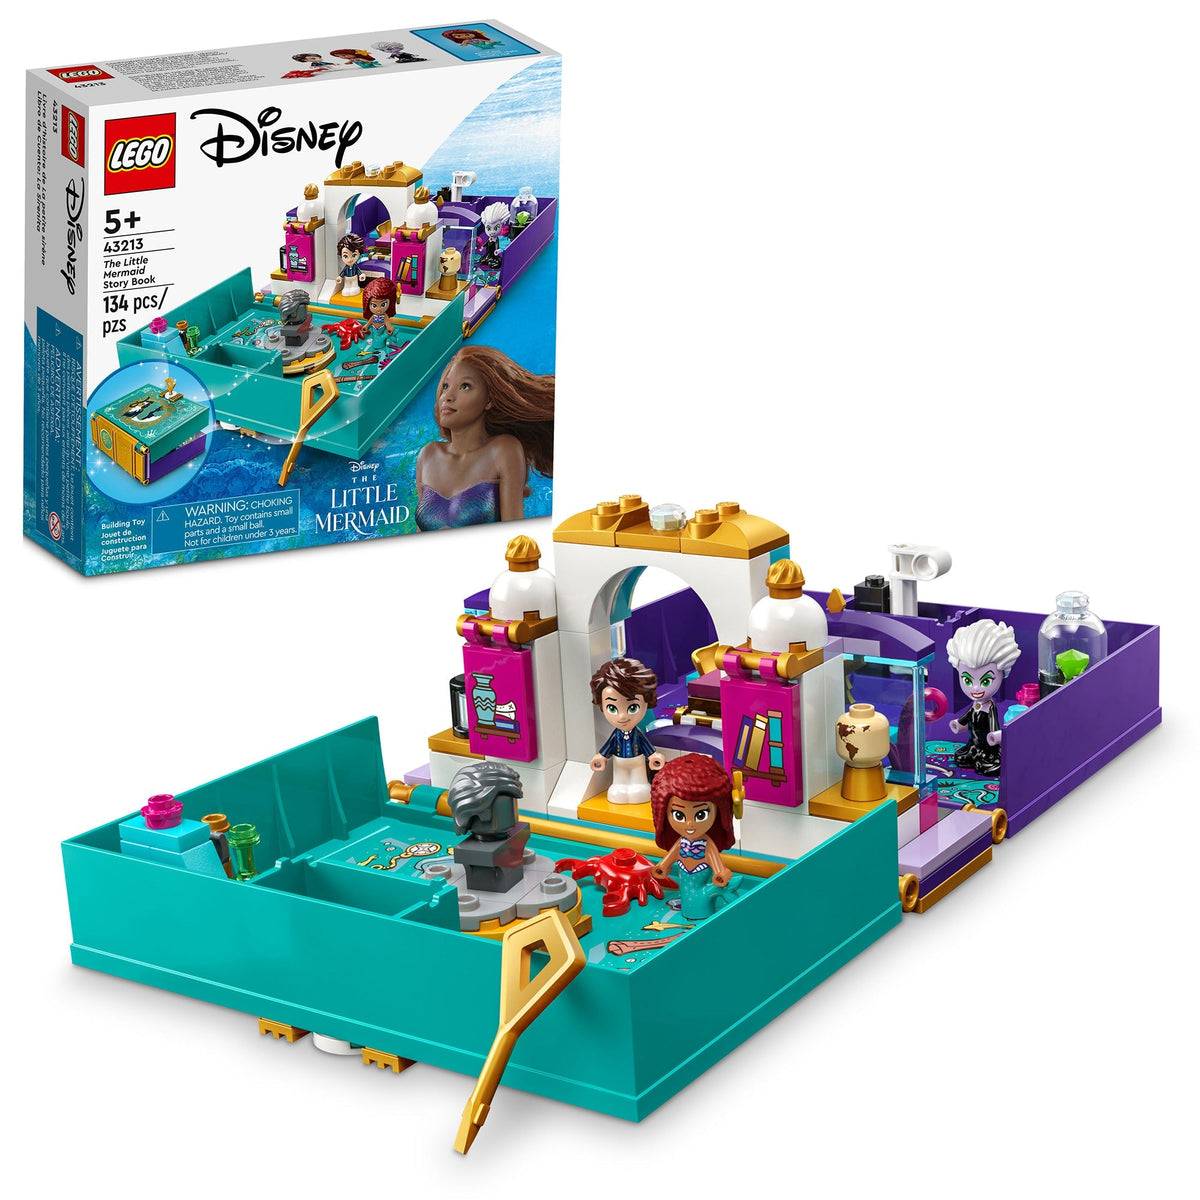 LEGO Toys & Games LEGO Disney The Little Mermaid Story Book, 43213, Ages 5+, 134 Pieces 673419378437